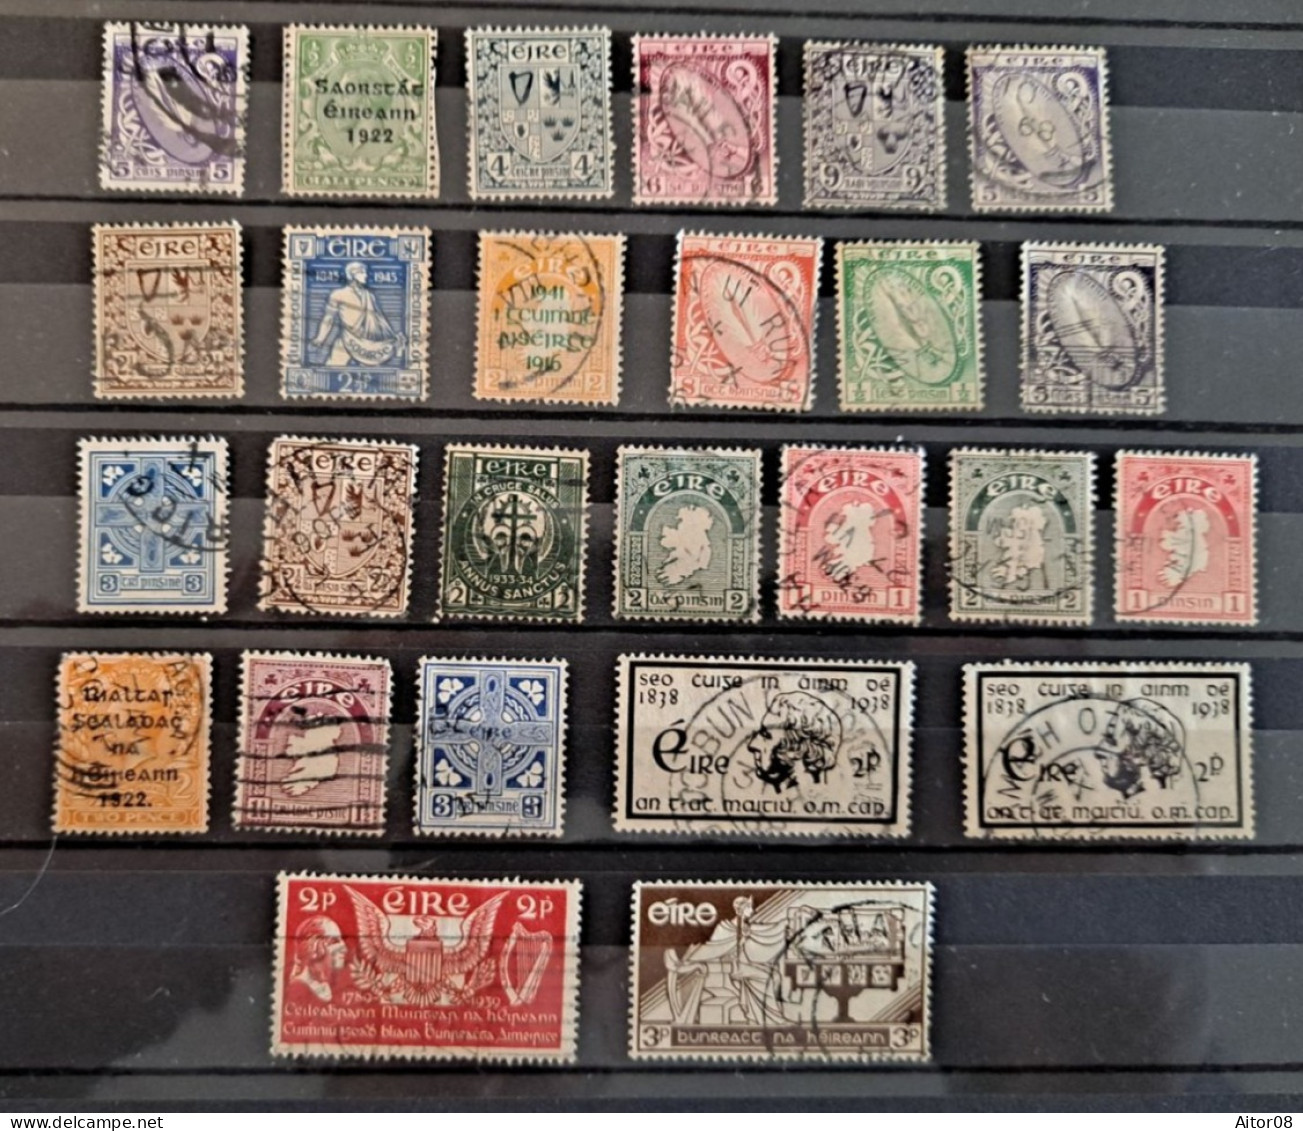 JOLI LOT TIMBRES OBLITERES ANNEES 1920/30.BELLE VALEUR CATALOGUE - Used Stamps